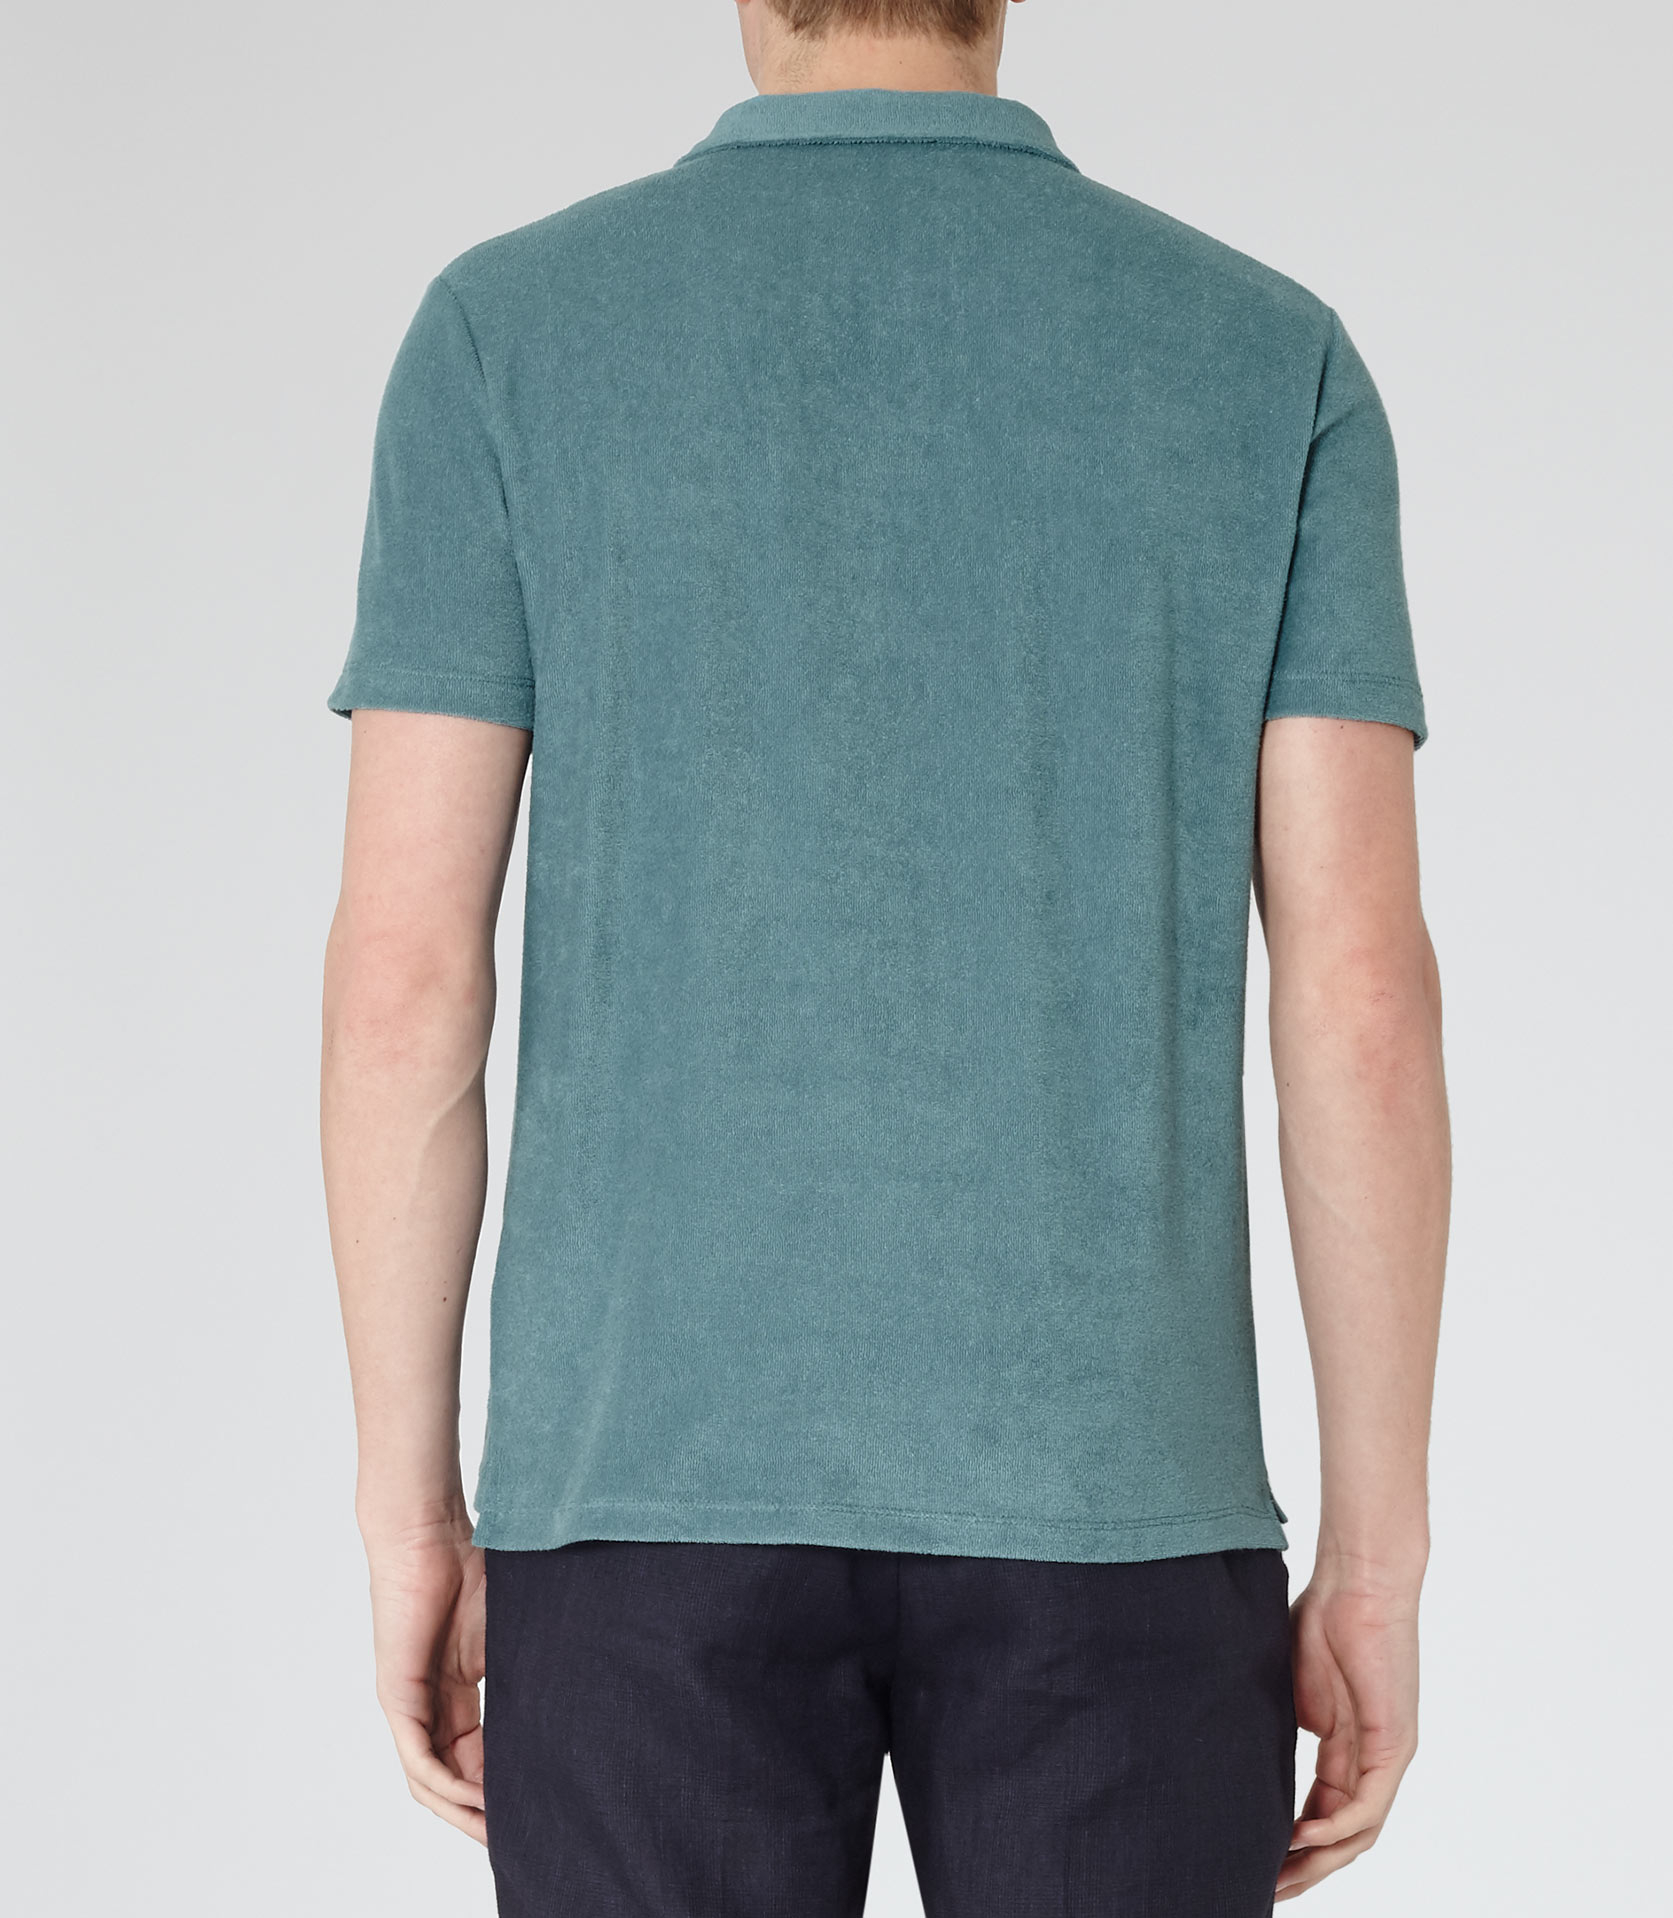 Reiss Montego Terry Towelling Polo Shirt in Green for Men - Lyst